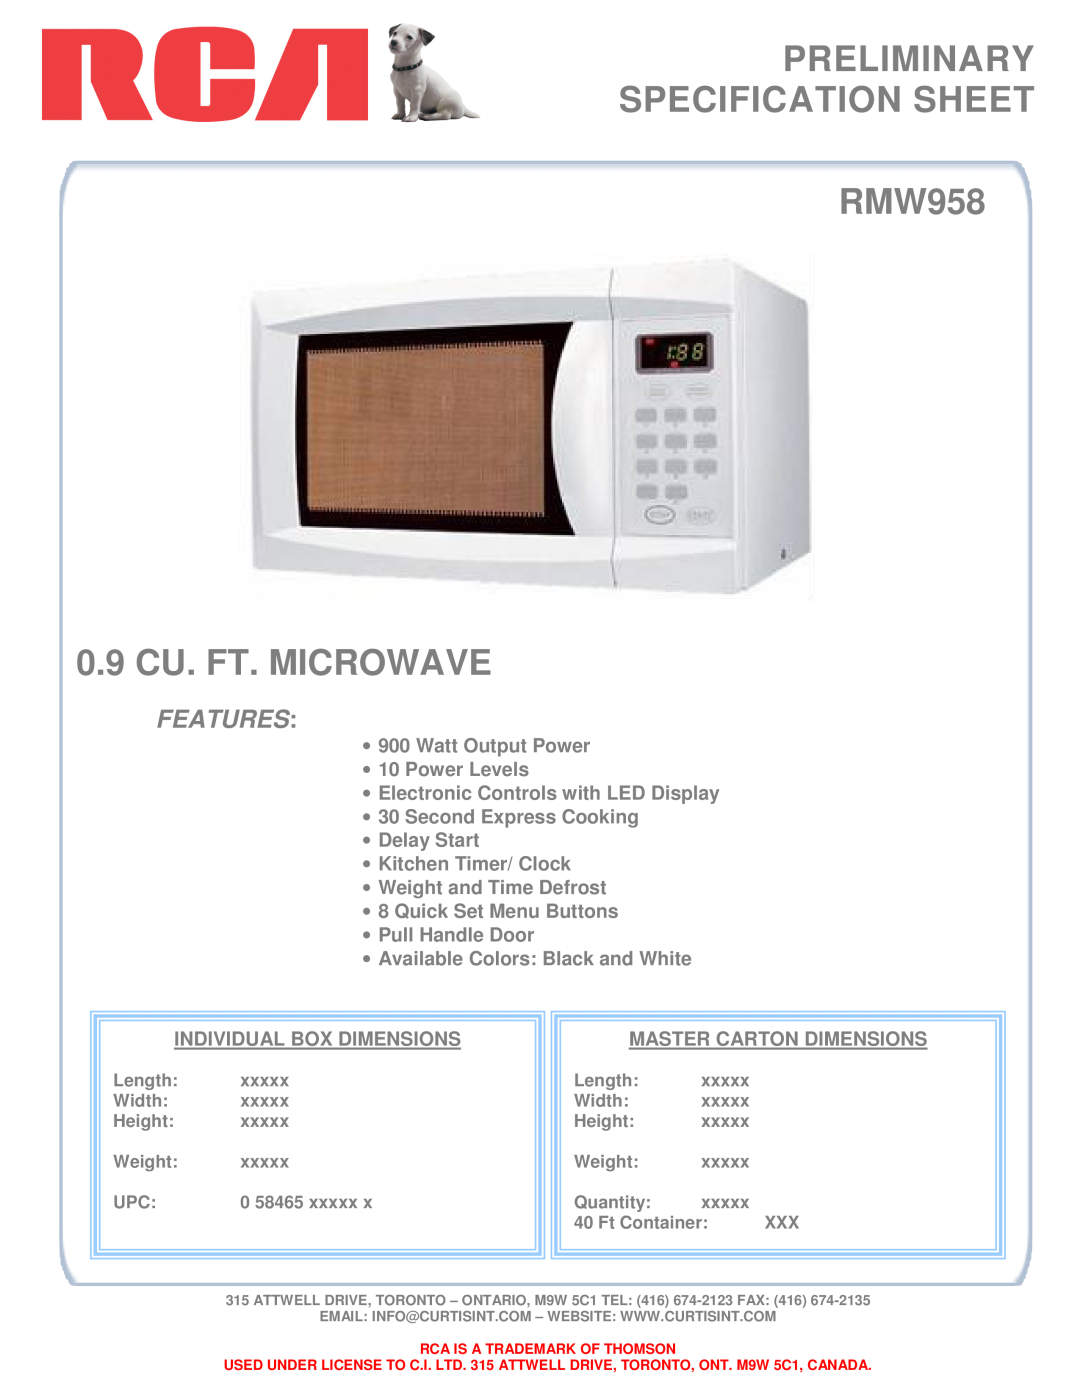 RCA specifications PRELIMINARY SPECIFICATION SHEET RMW958, 0.9 CU. FT. MICROWAVE, Features 